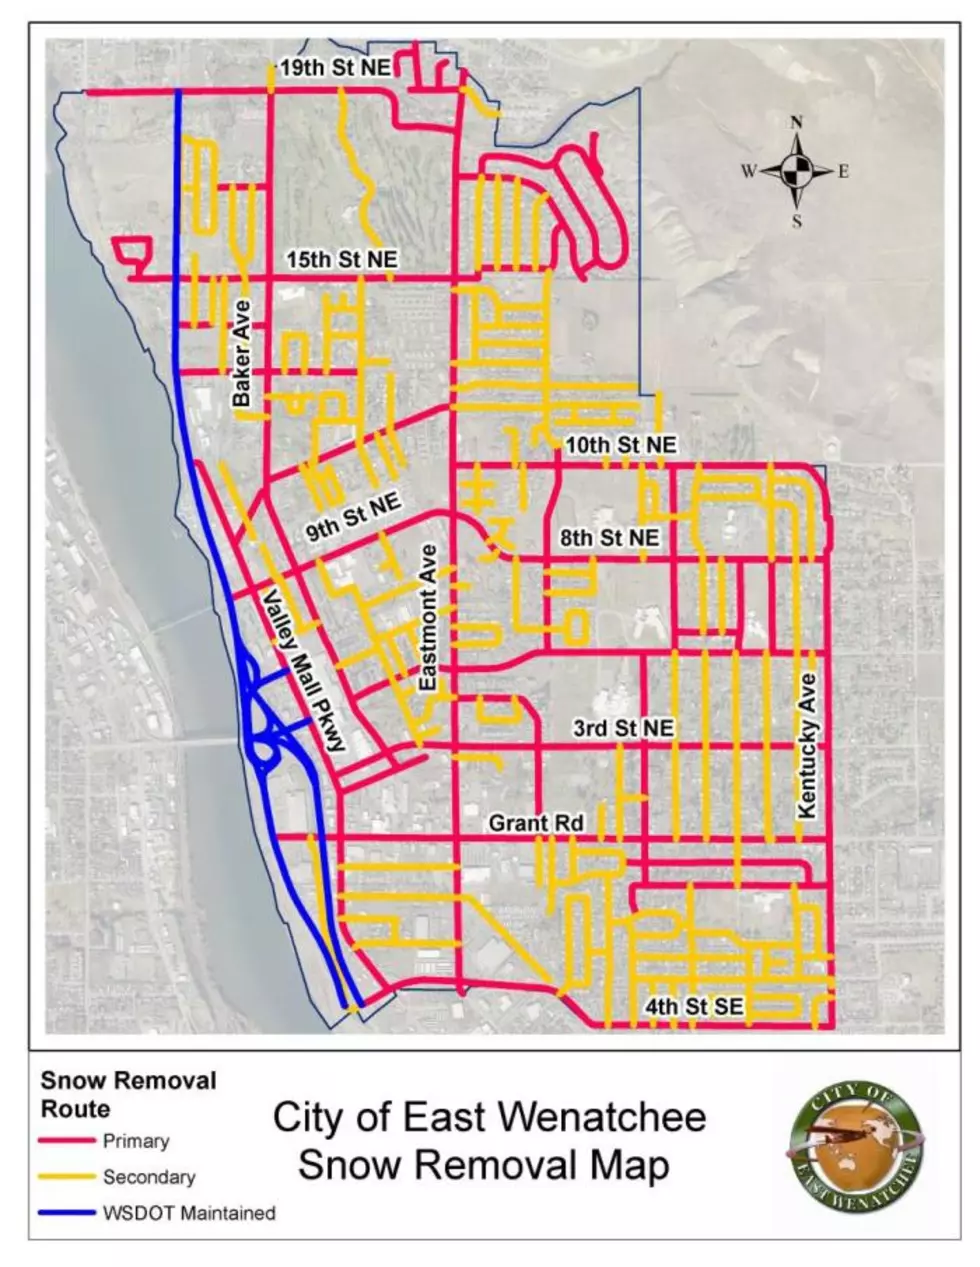 City of East Wenatchee Releasing Information on Snow Removal